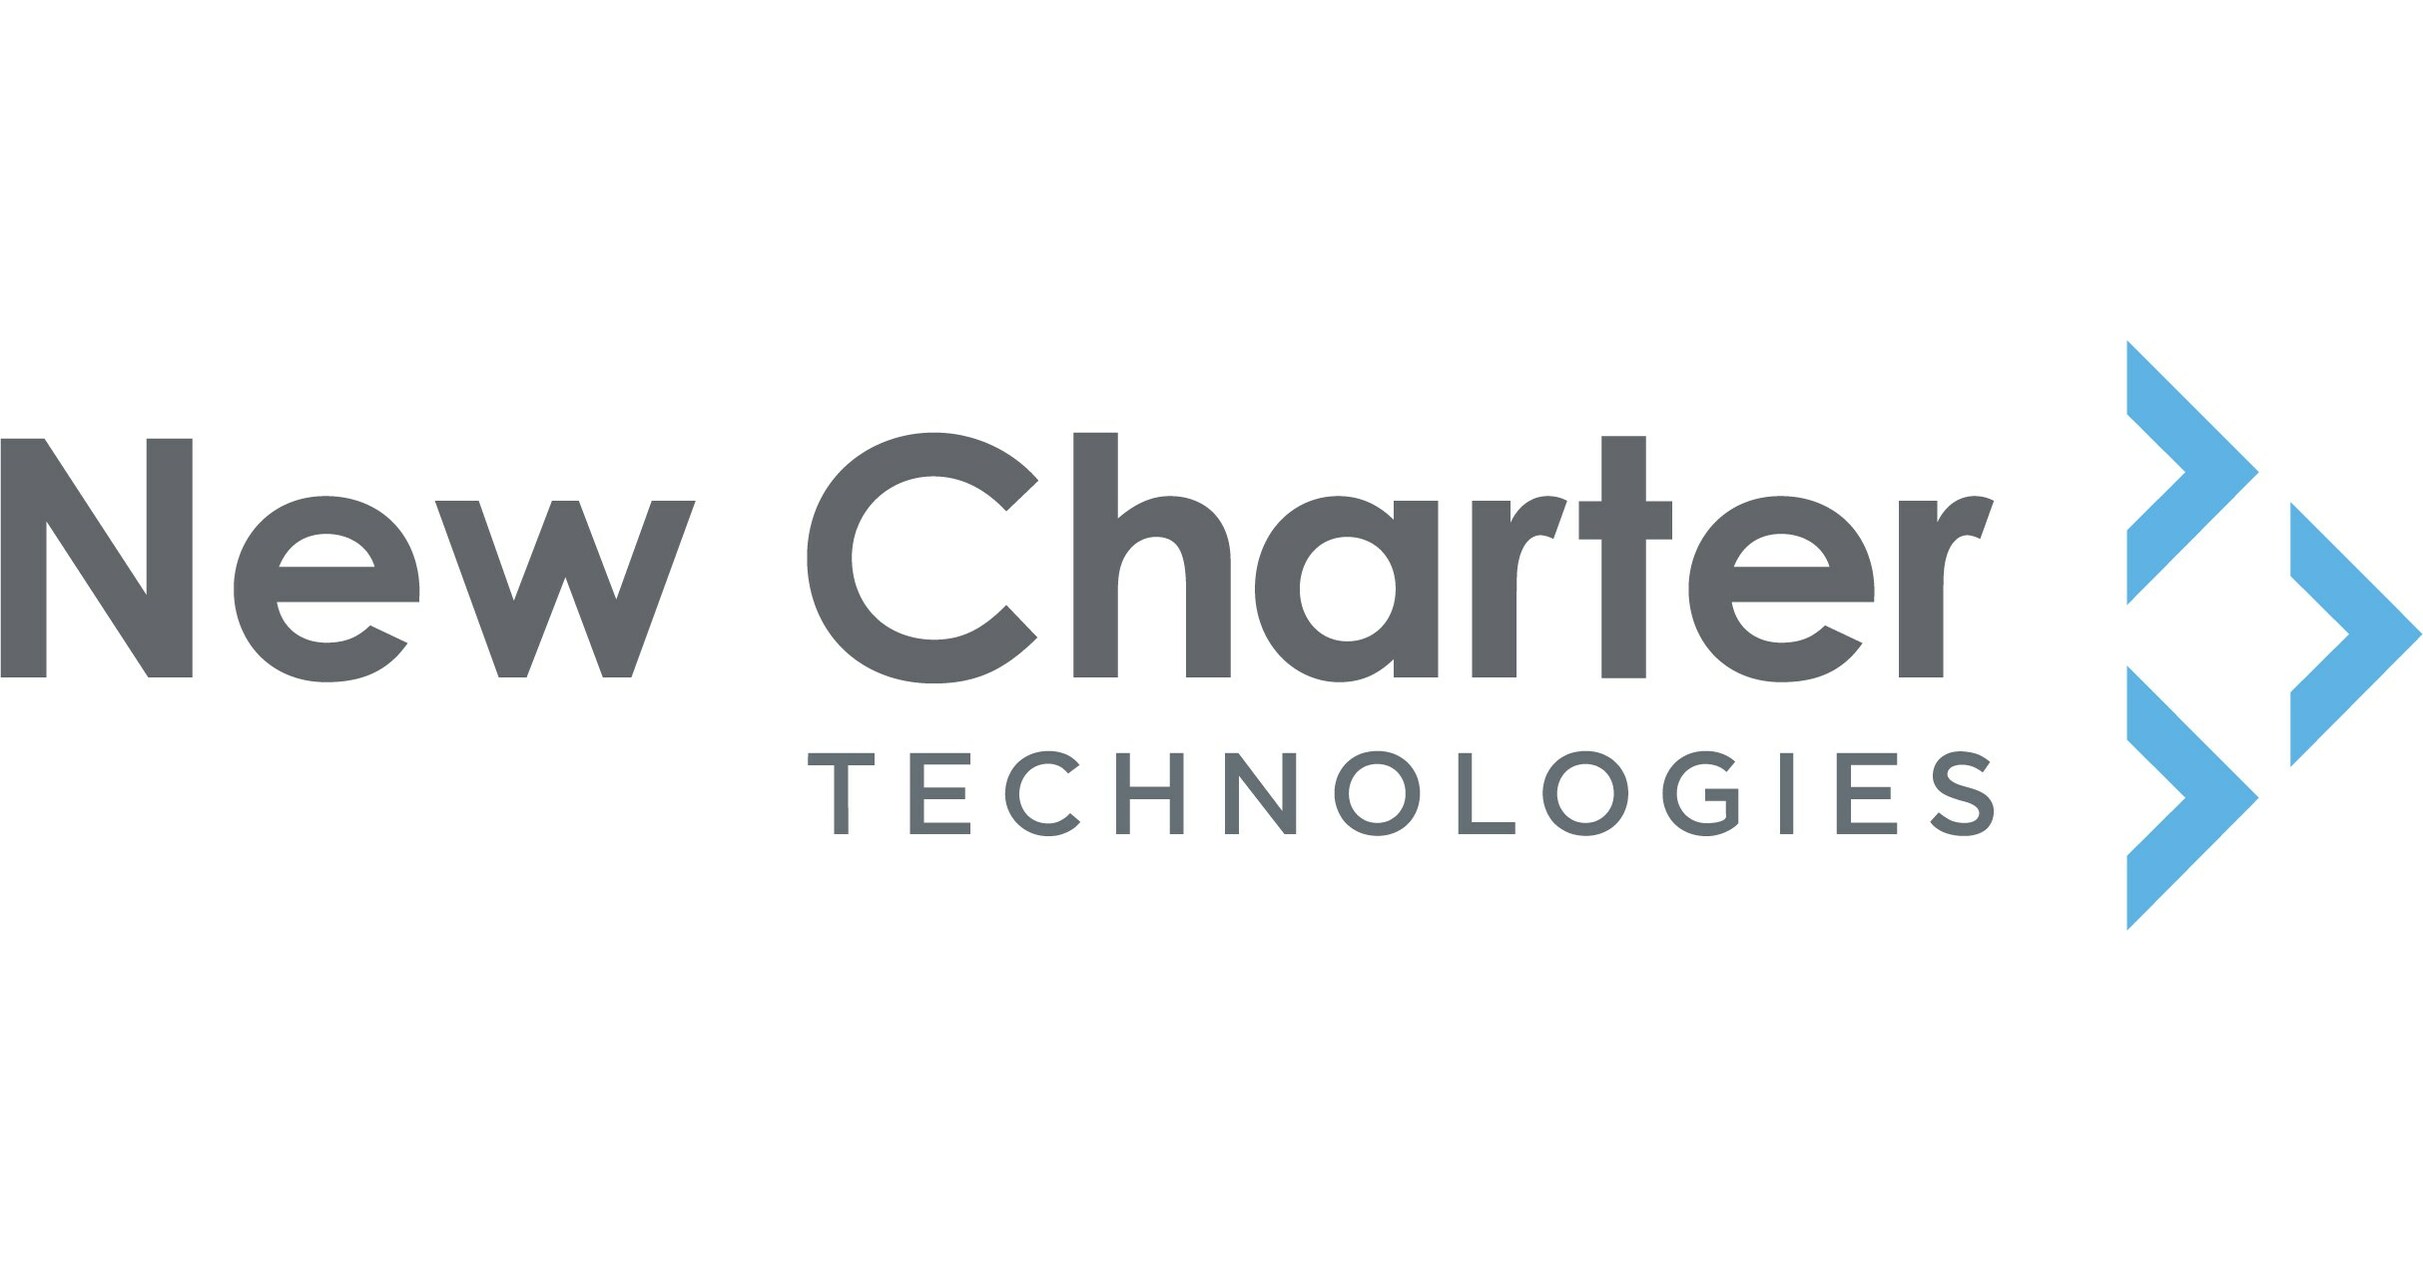 Managed IT Services Provider Biz Technology Solutions Enters Into Partnership With New Charter Technologies